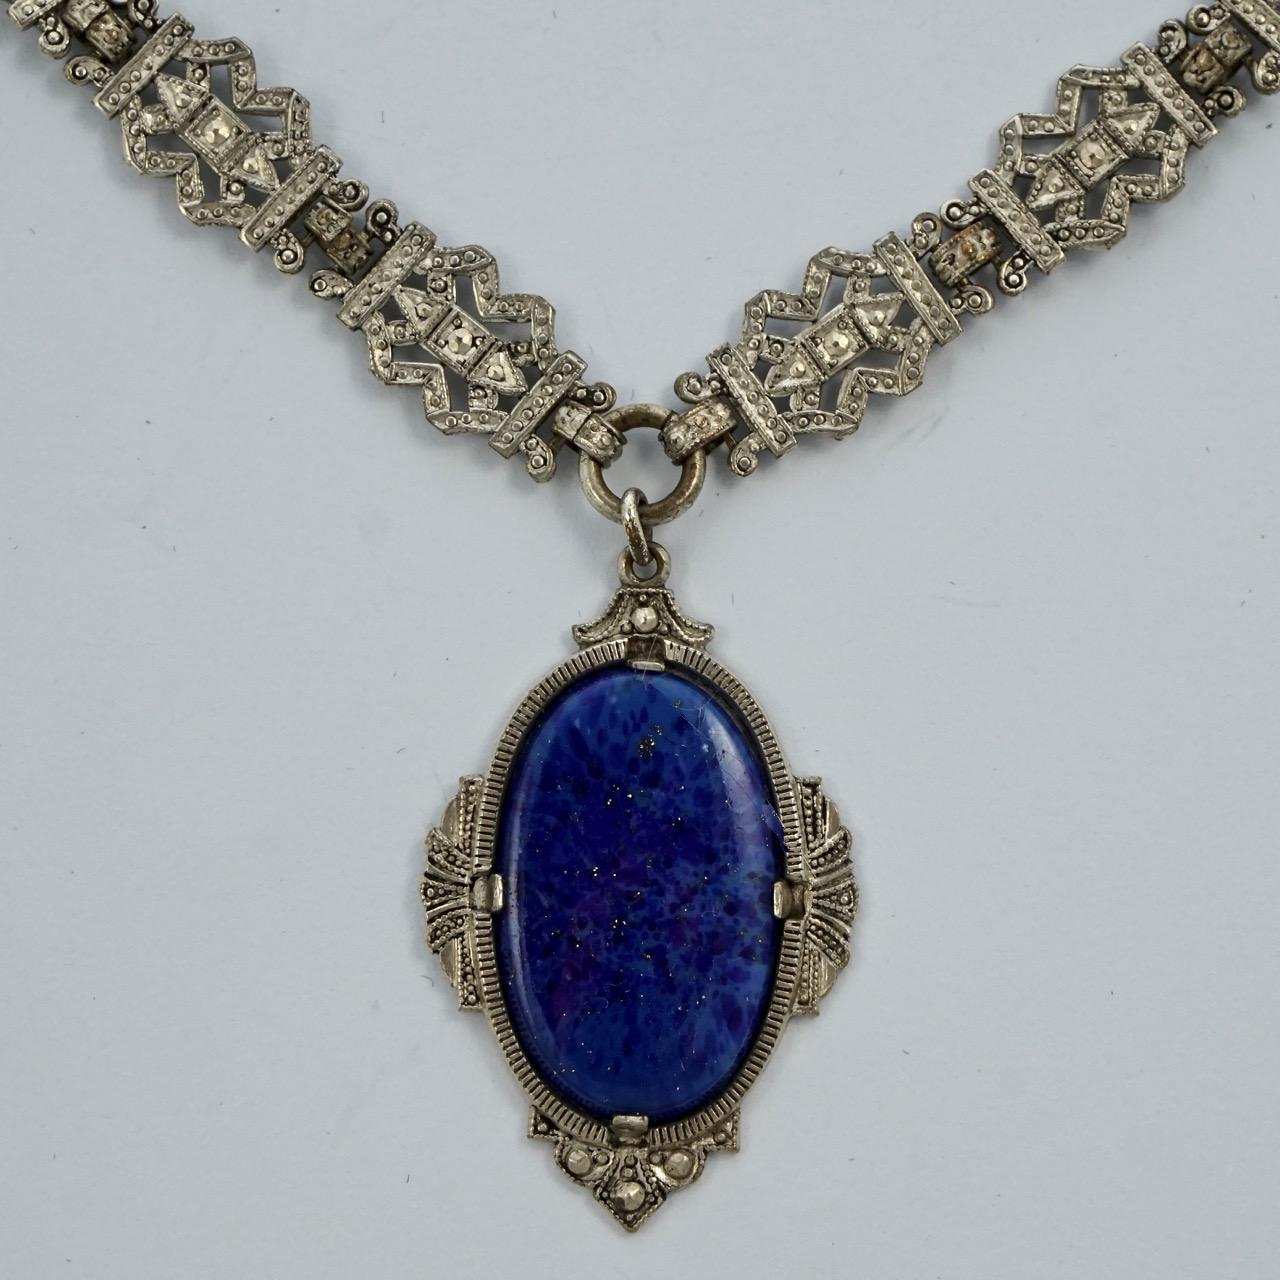 Art Deco ornate silver plated link chain sautoir necklace featuring a beautiful lapis lazuli pendant. The lapis lazuli is really lovely, embedded with sparkling fool's gold (iron pyrite). Length 42.6cm / 16.8 inches by width 9.5mm / .37 inch, and